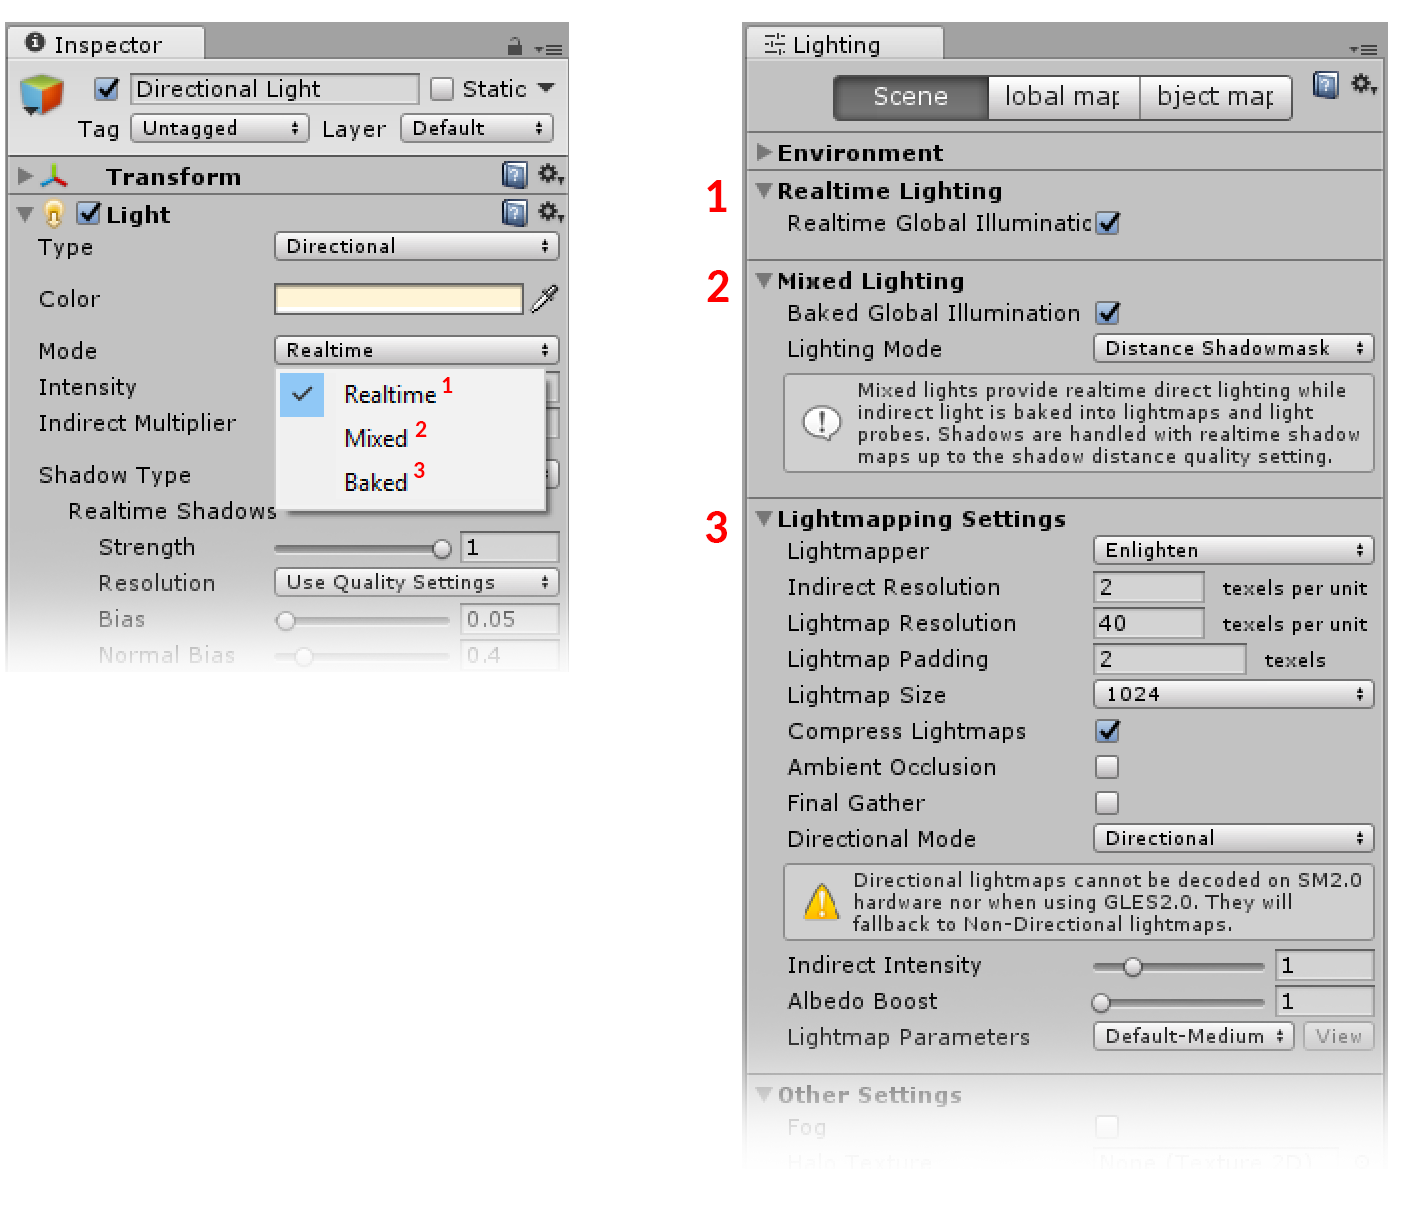 The available Light Modes in the Light component (left), and the corresponding settings available for those modes in the Lighting Scene window (right).